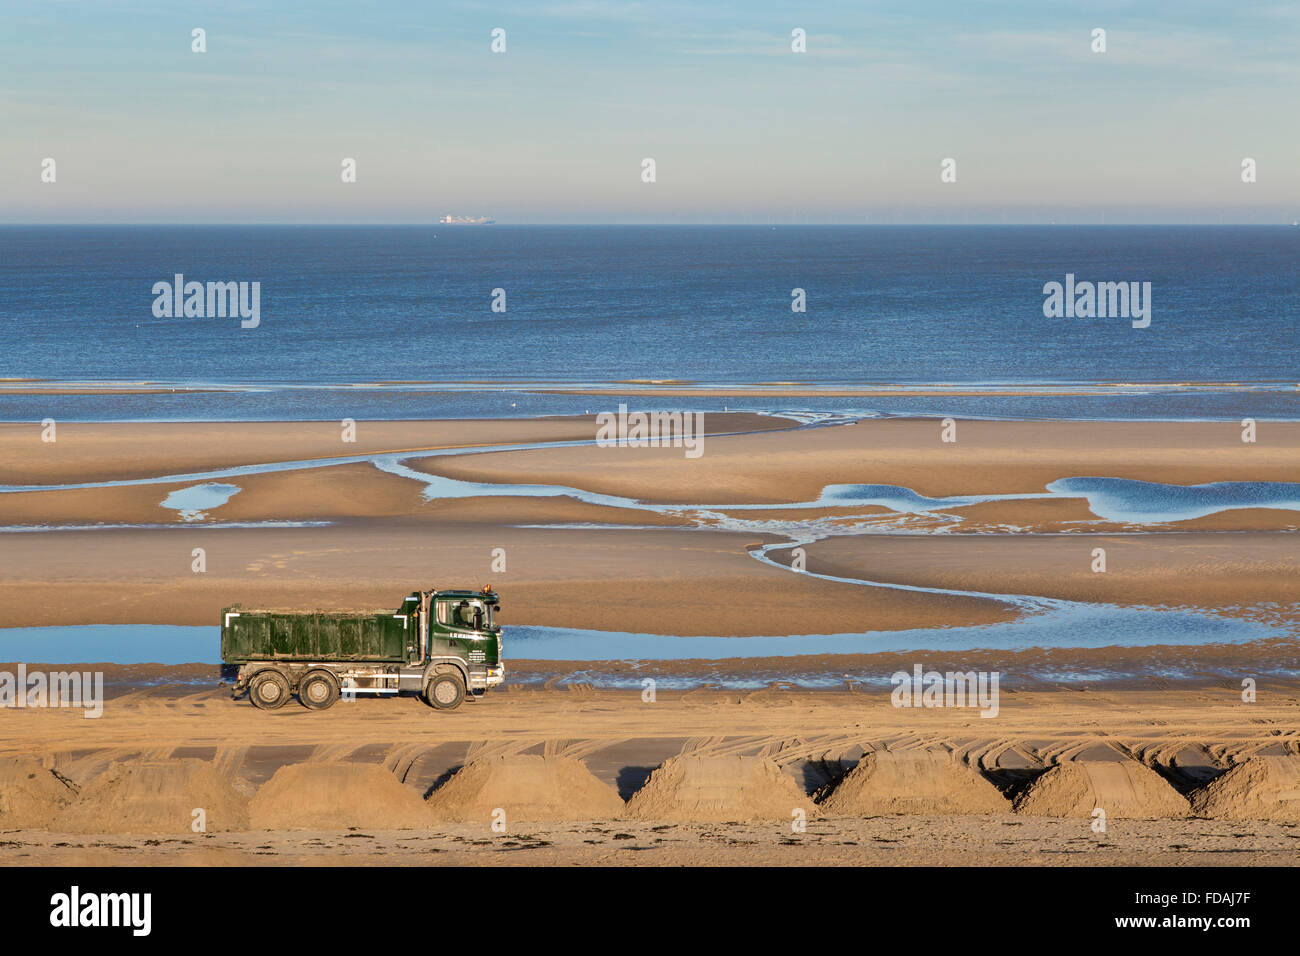 Truck at work to raise the beach along the North Sea coast at Blankenberge, Belgium Stock Photo